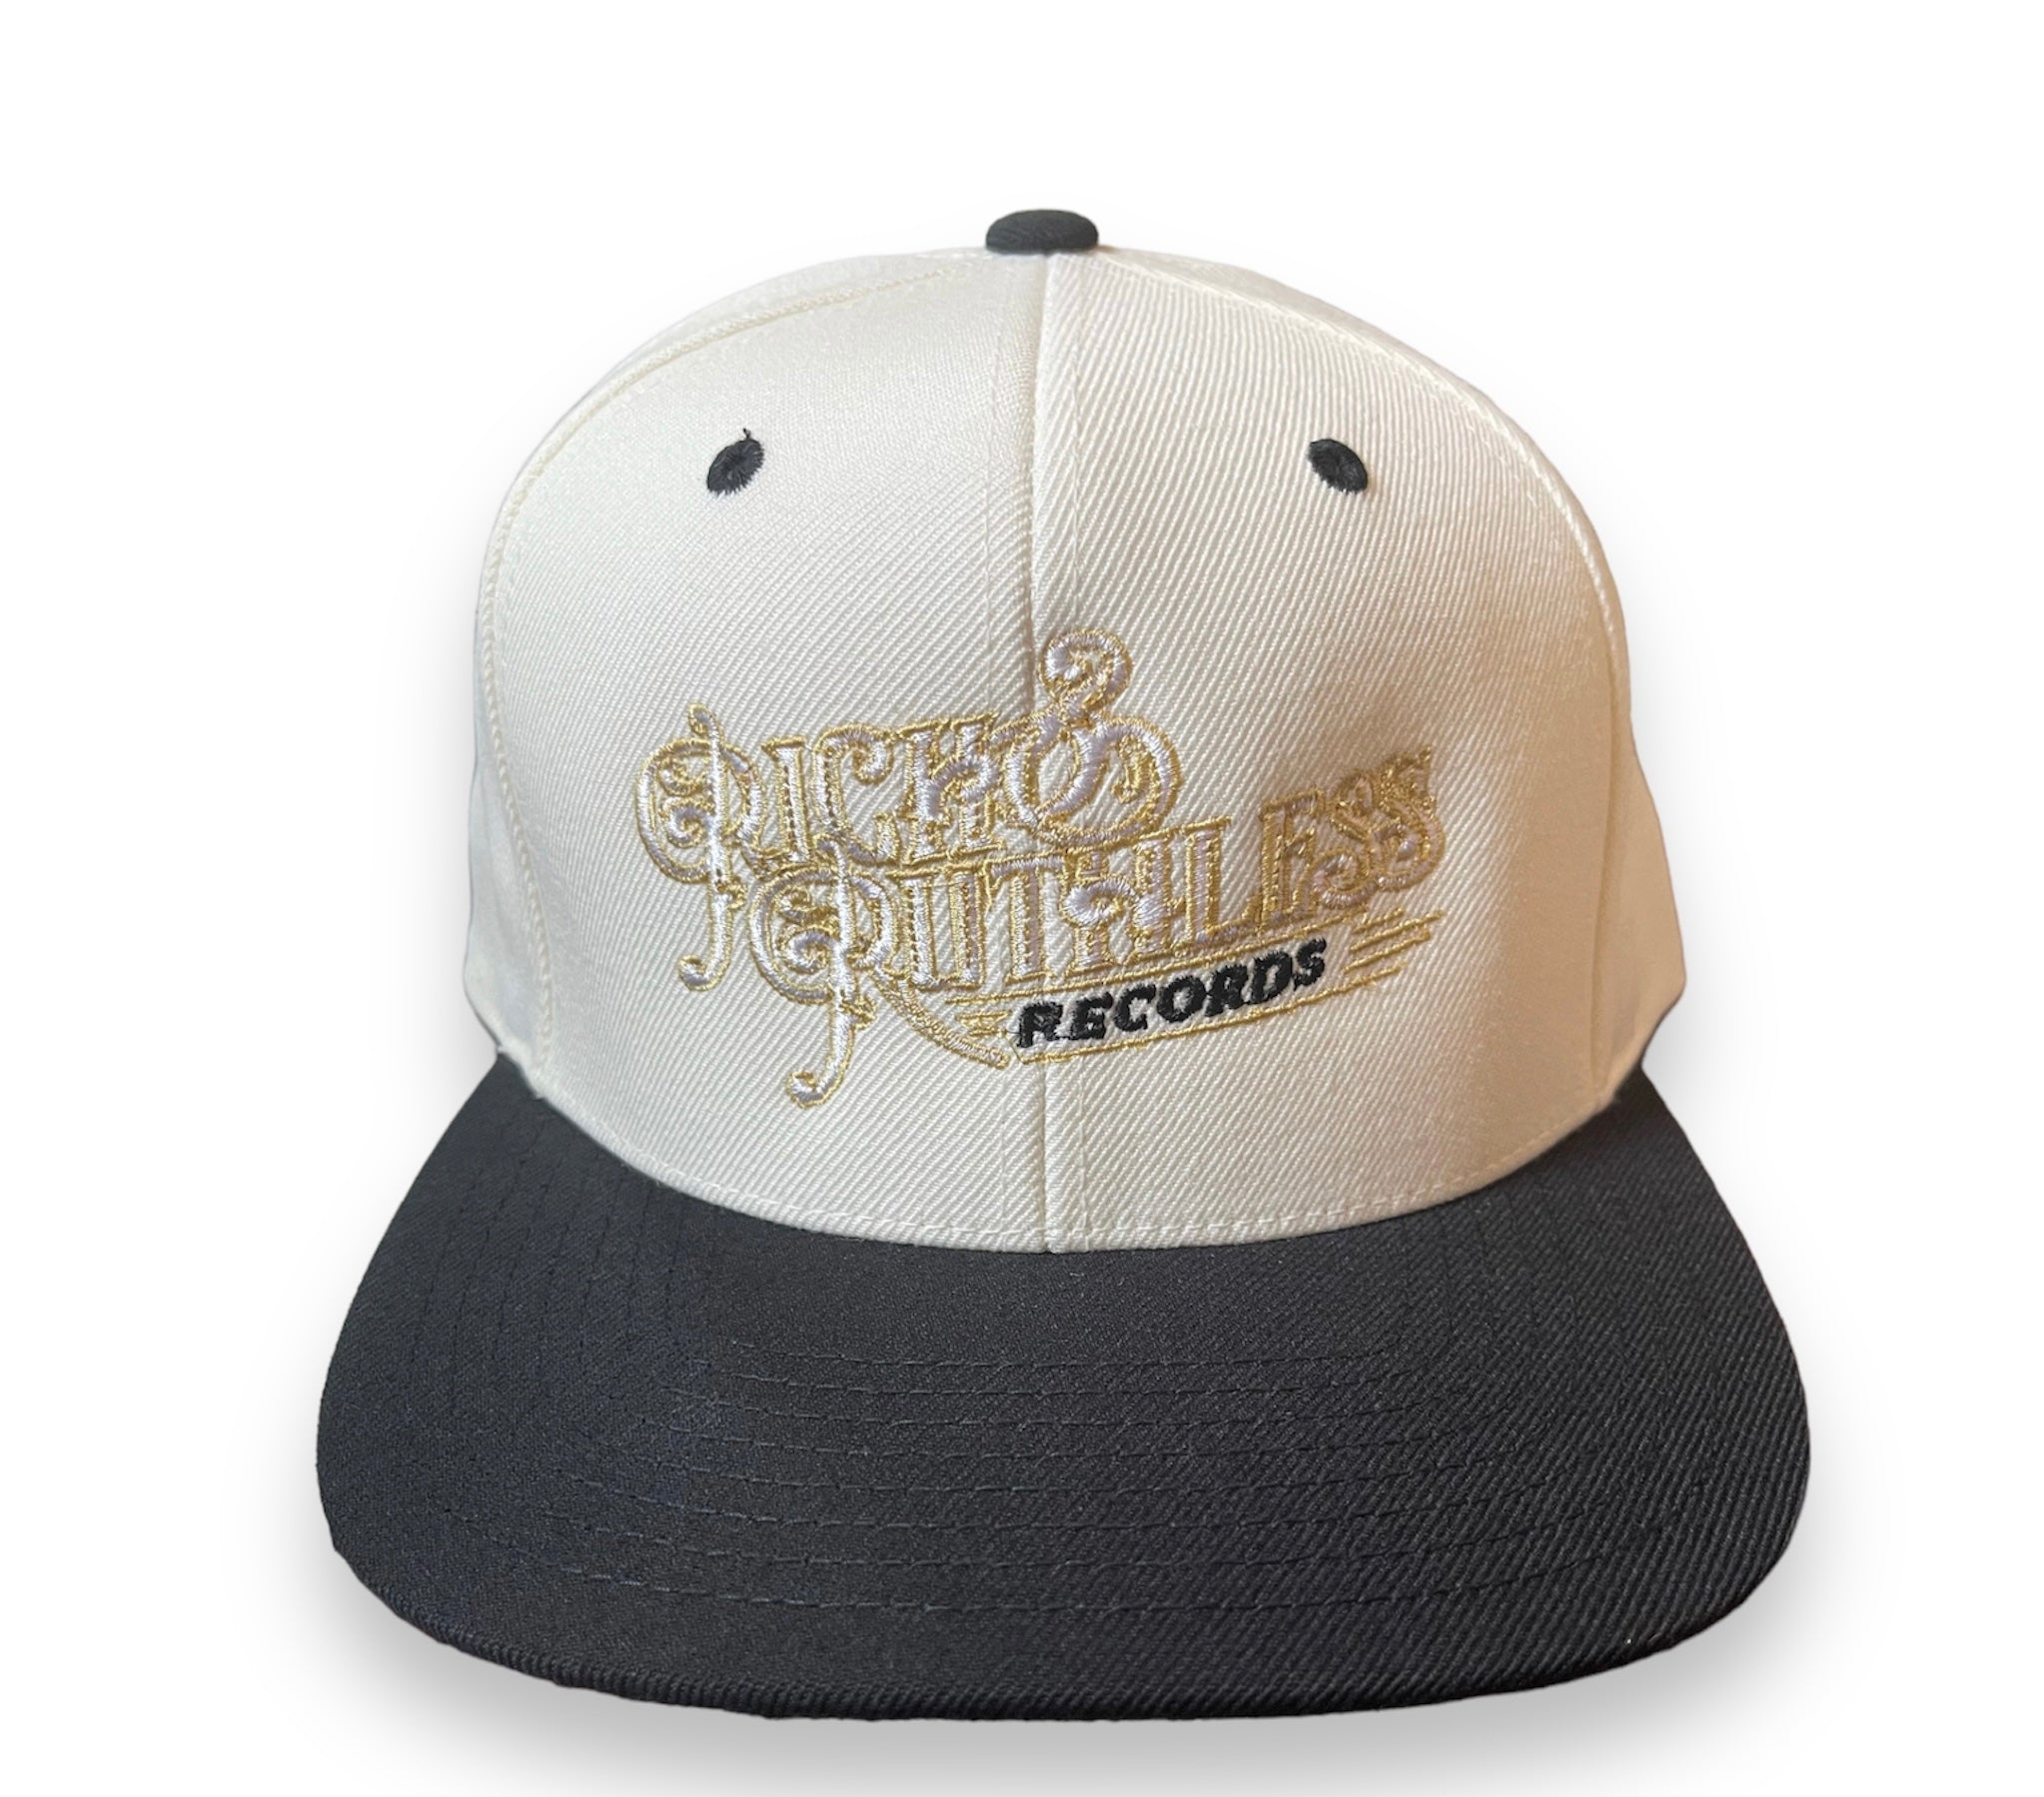 Rich & Ruthless Records Collections Snapback